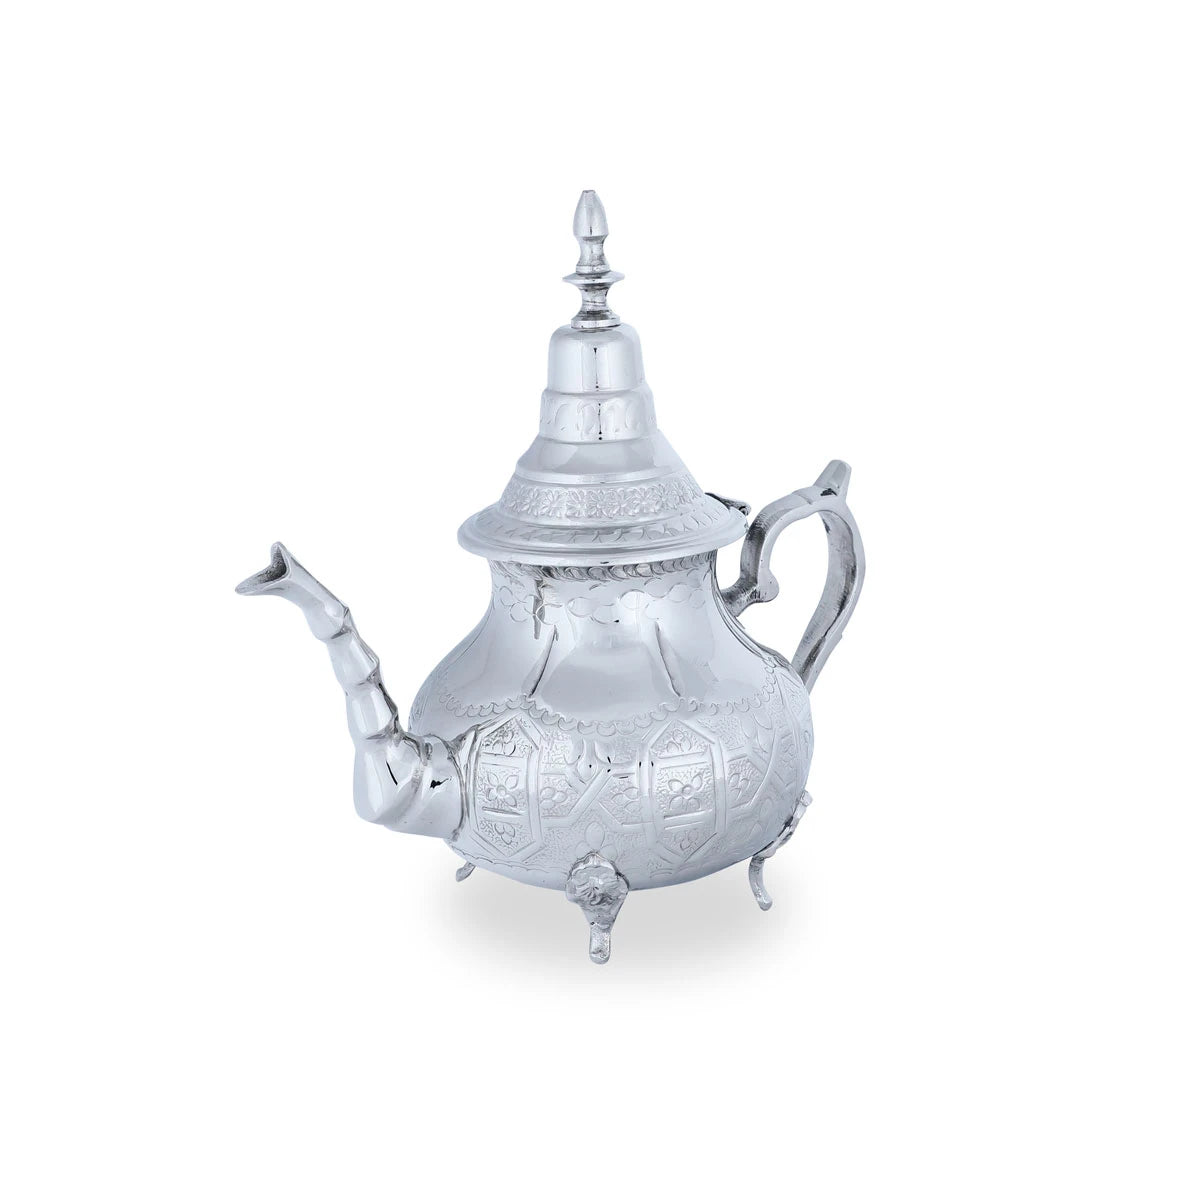 Authentic Moroccan Brass Metal Teapot with Glossy Silver Nickel Coating